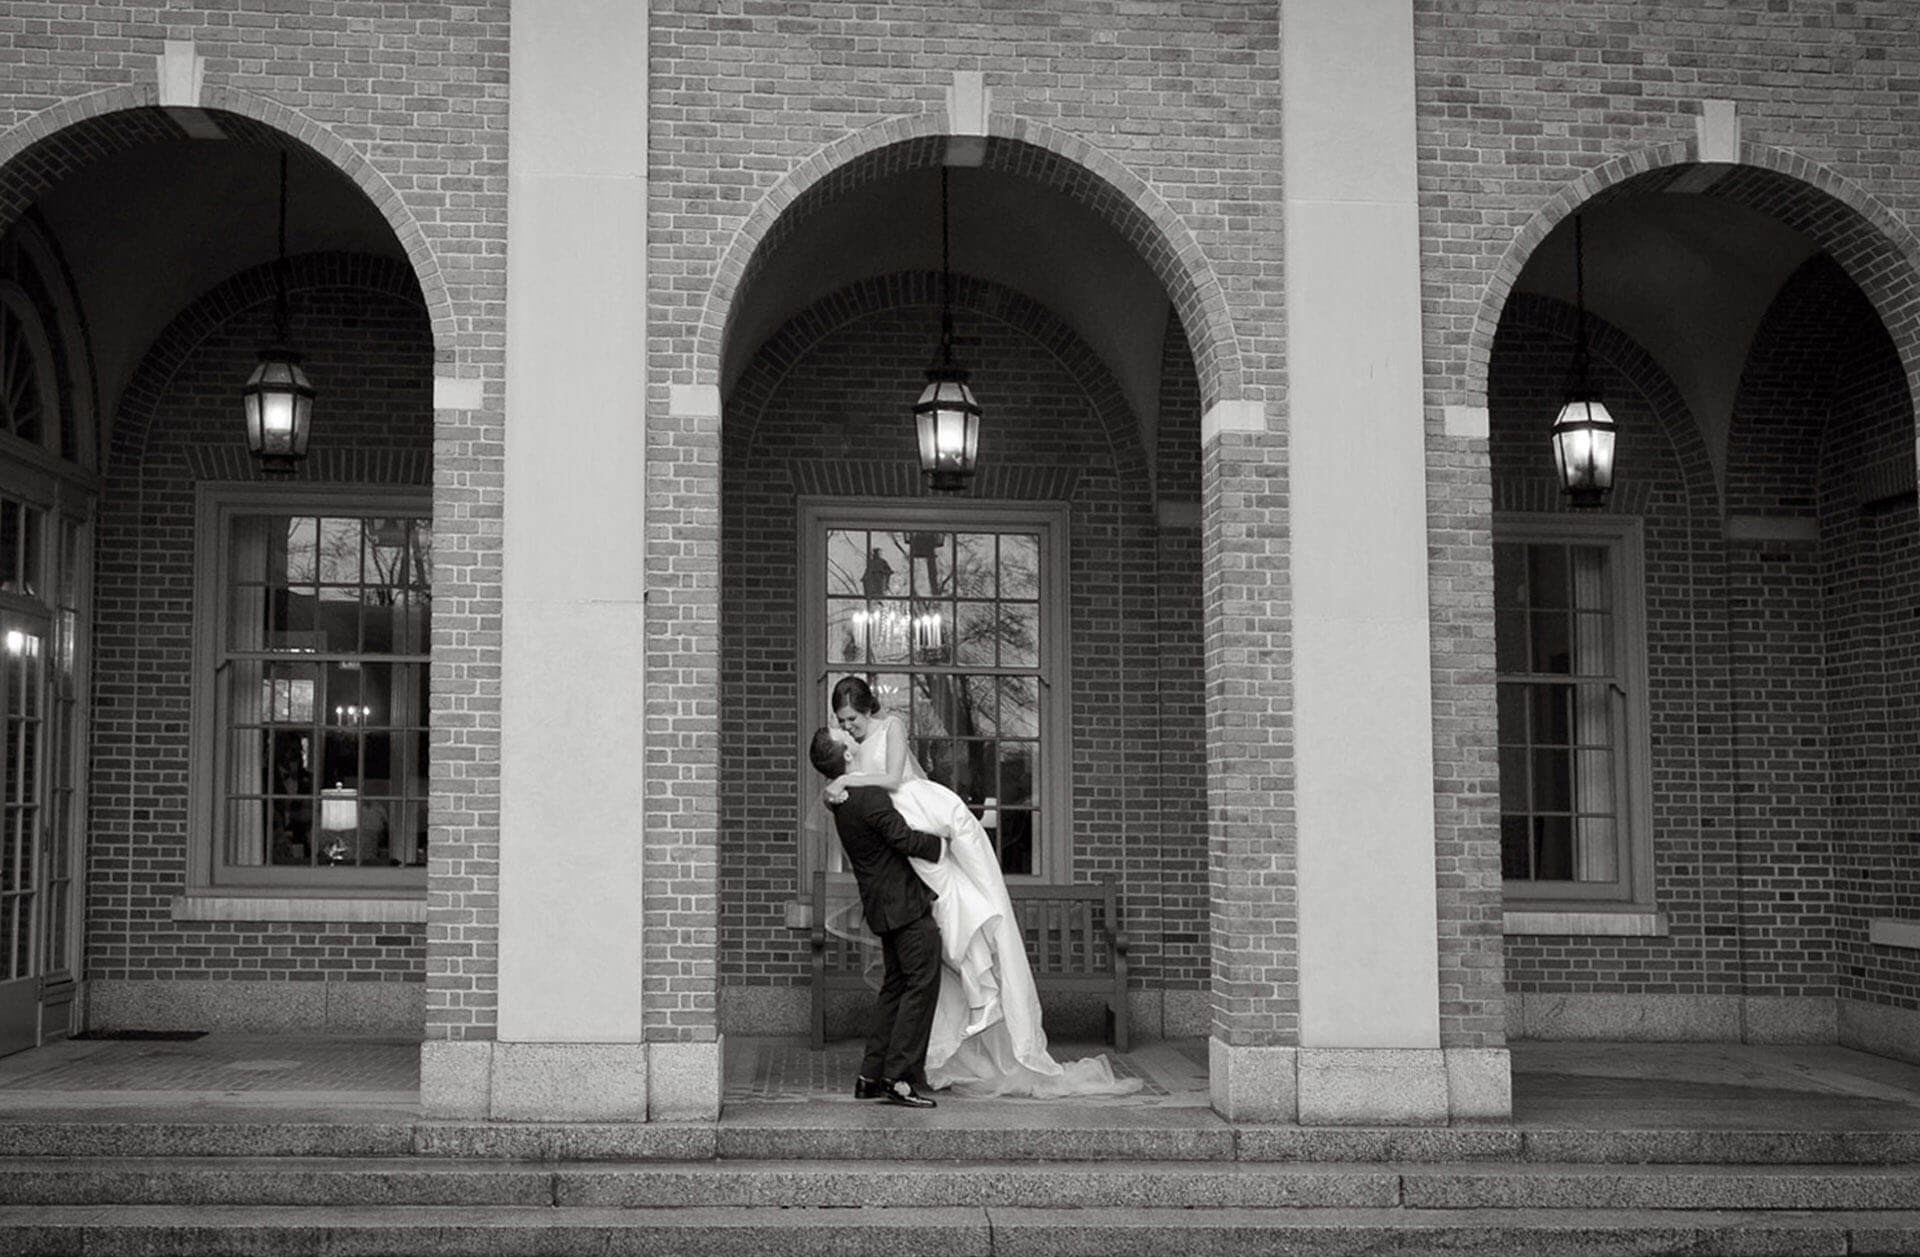 The bride and groom kiss in front of the Dearborn Inn in Detroit, Michigan.